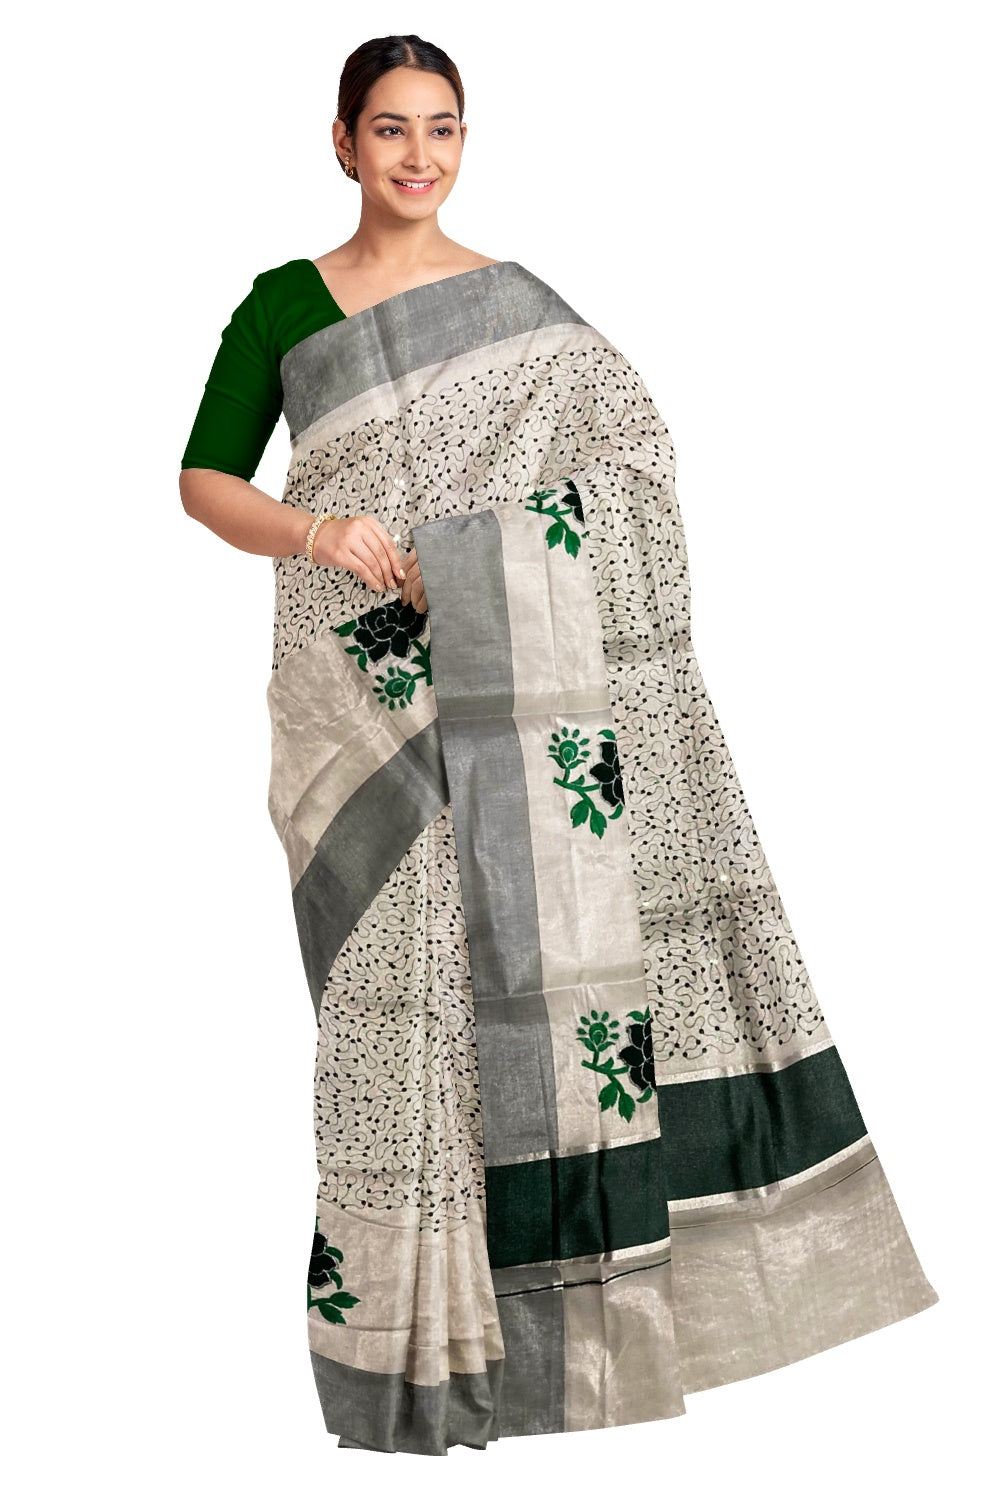 Kerala Silver Tissue Kasavu Saree With Dark Green Embroidered Floral and Sequins Design